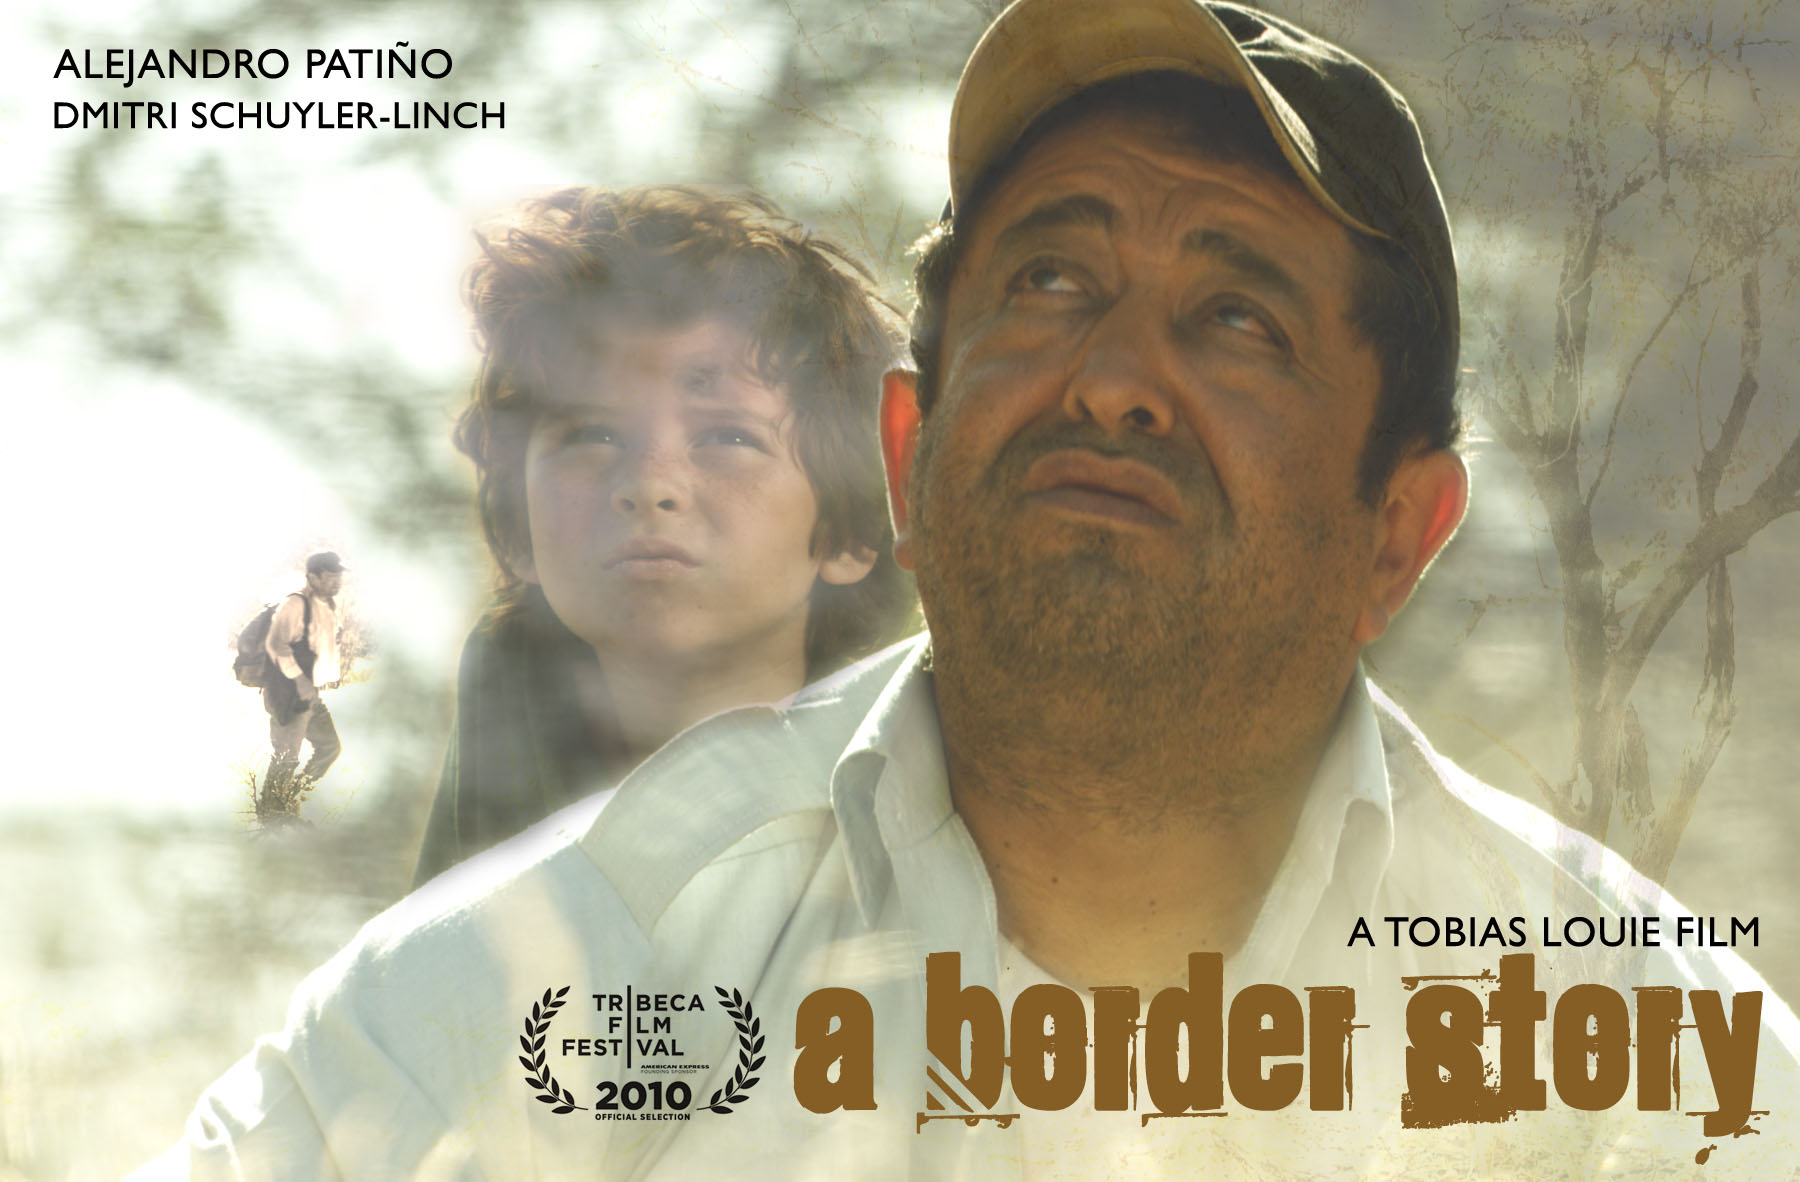 Alejandro Patino and Dmitri Schuyler-Linch in A Border Story